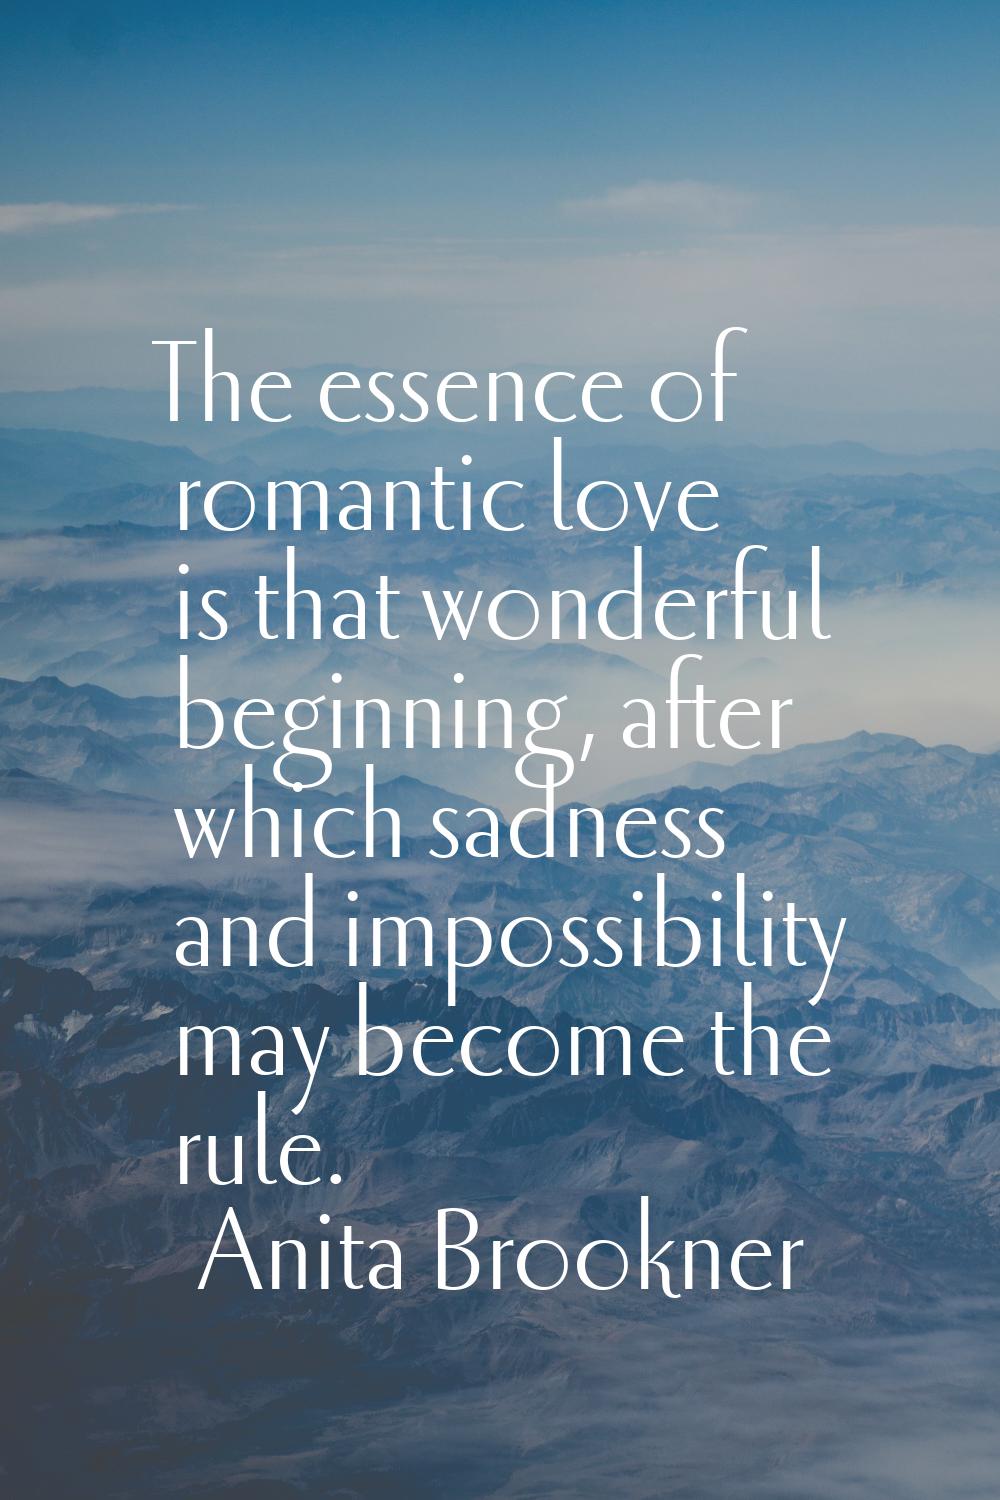 The essence of romantic love is that wonderful beginning, after which sadness and impossibility may